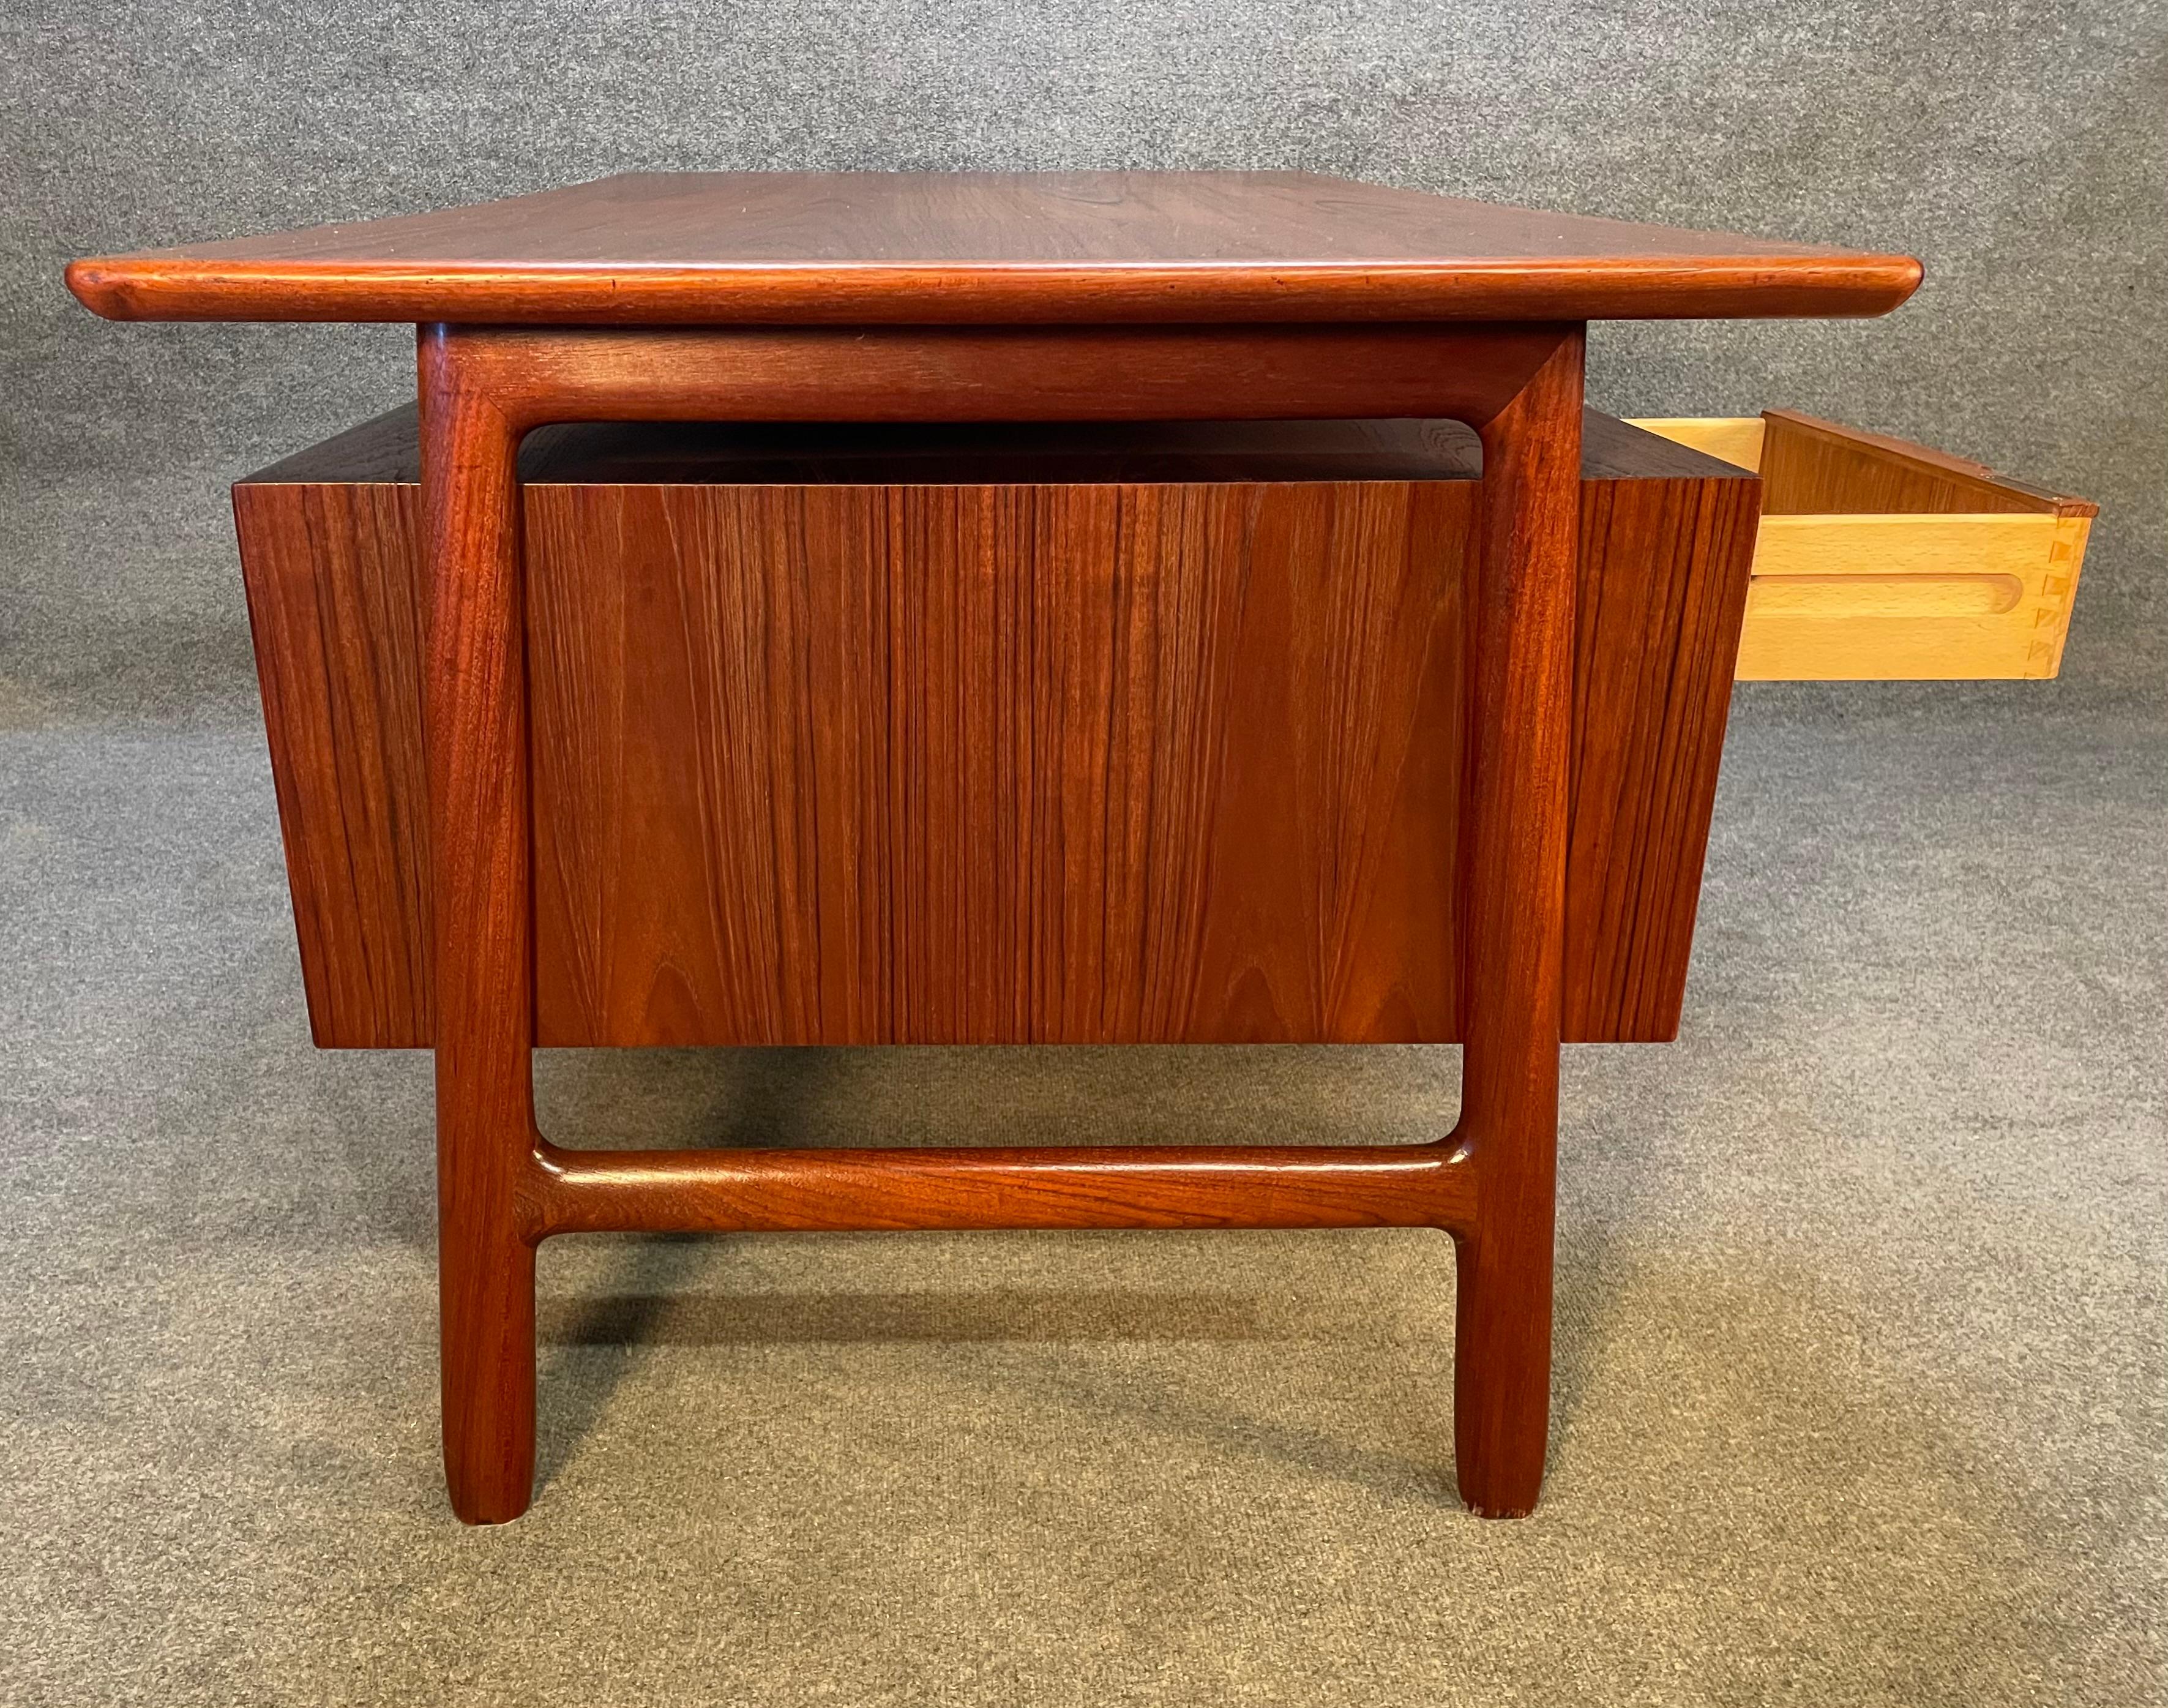 Here is the iconic Model 75 desk designed by Gunni Omann and manufactured by Omann Jun Mobelfabrik which was recently imported from Denmark to California before its restoration. This stunning 1960's Scandinavian modern desk in teak features a